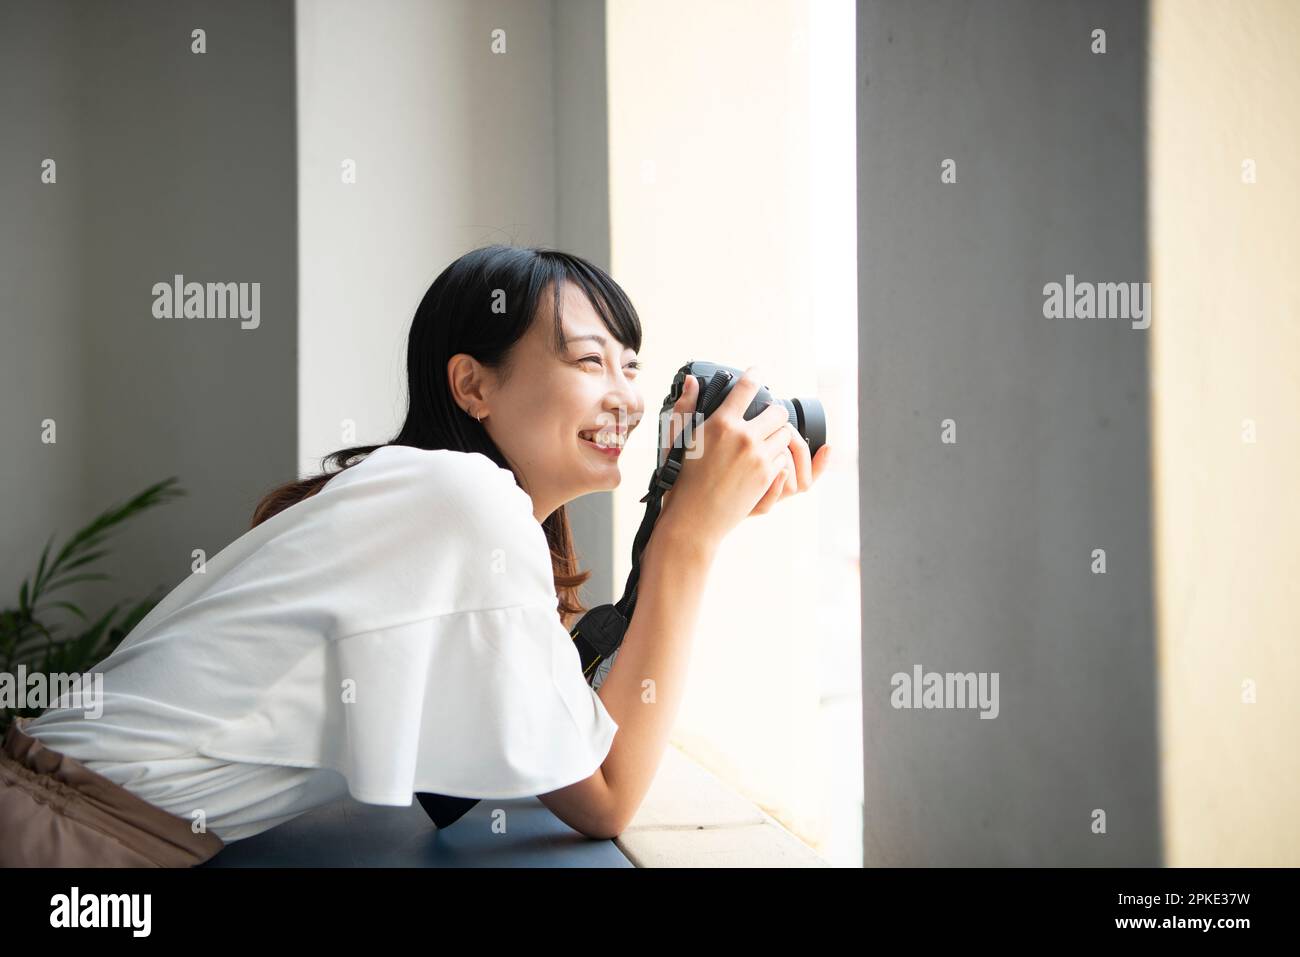 Woman holding an SLR camera and smiling Stock Photo